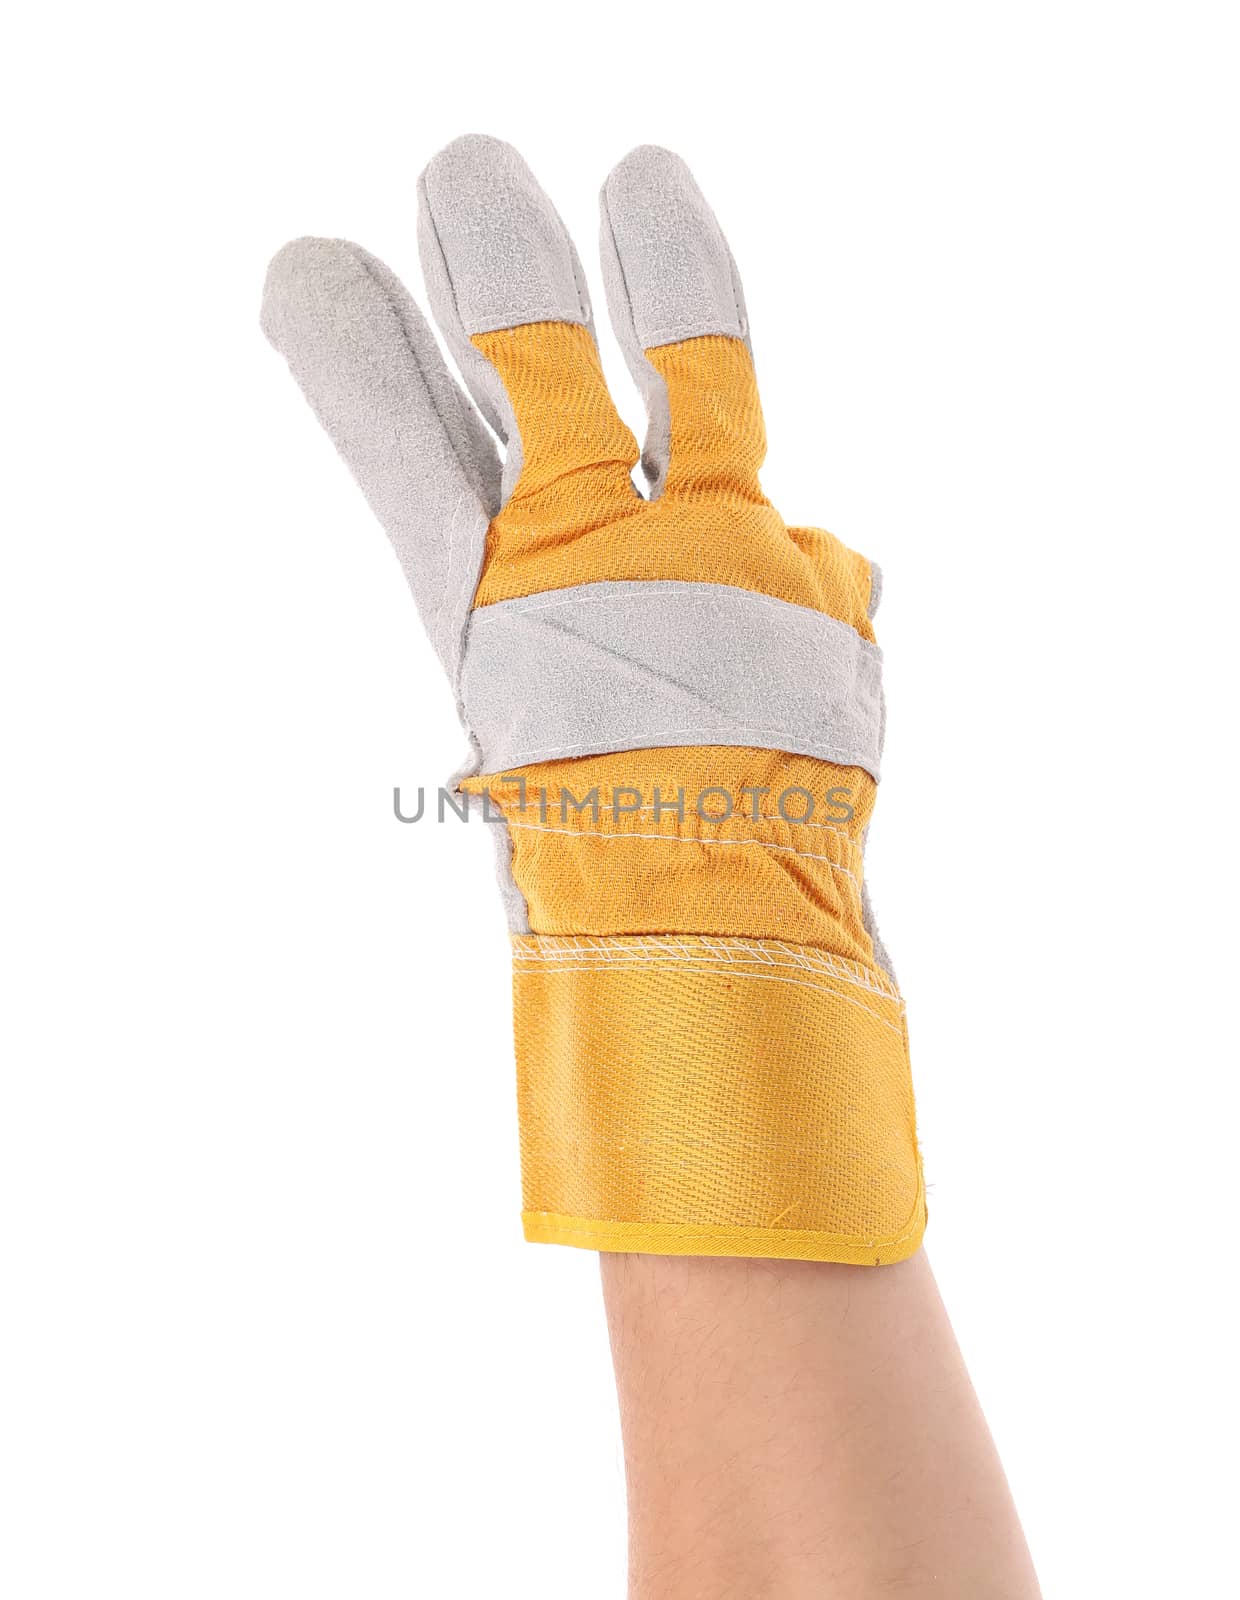 Gloved hand showing three finger. Isolated on a white background.